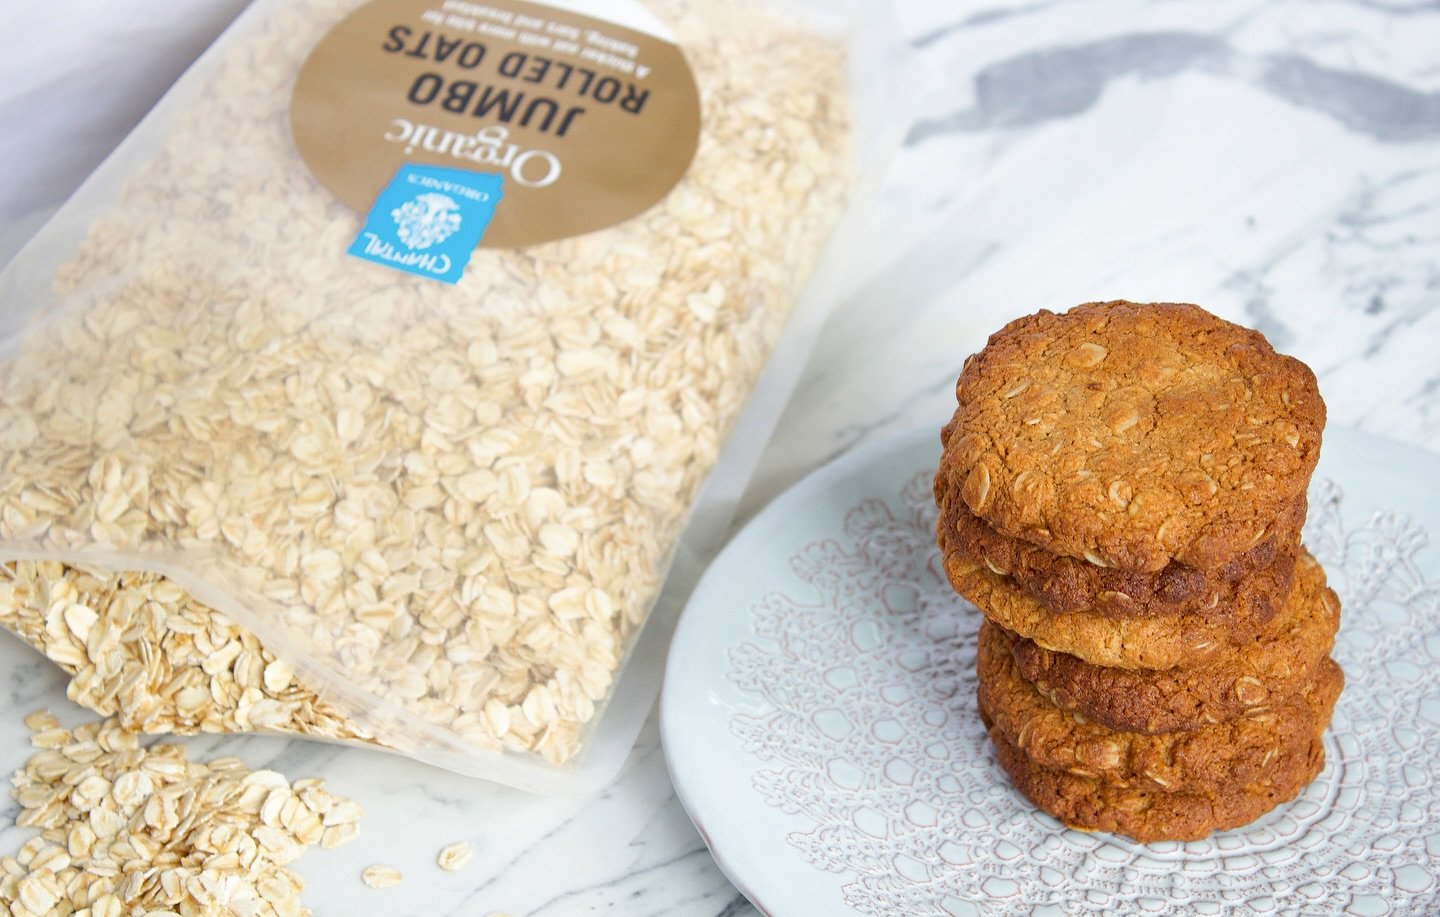 Who doesn&rsquo;t love an ANZAC bikkie? Here&rsquo;s my recipe for a nourishing version packed with whole foods (that you probably already have in your cupboard). It&rsquo;s free from refined sugar and suitable for vegans too 🍪

DRY INGREDIENTS
- 1/